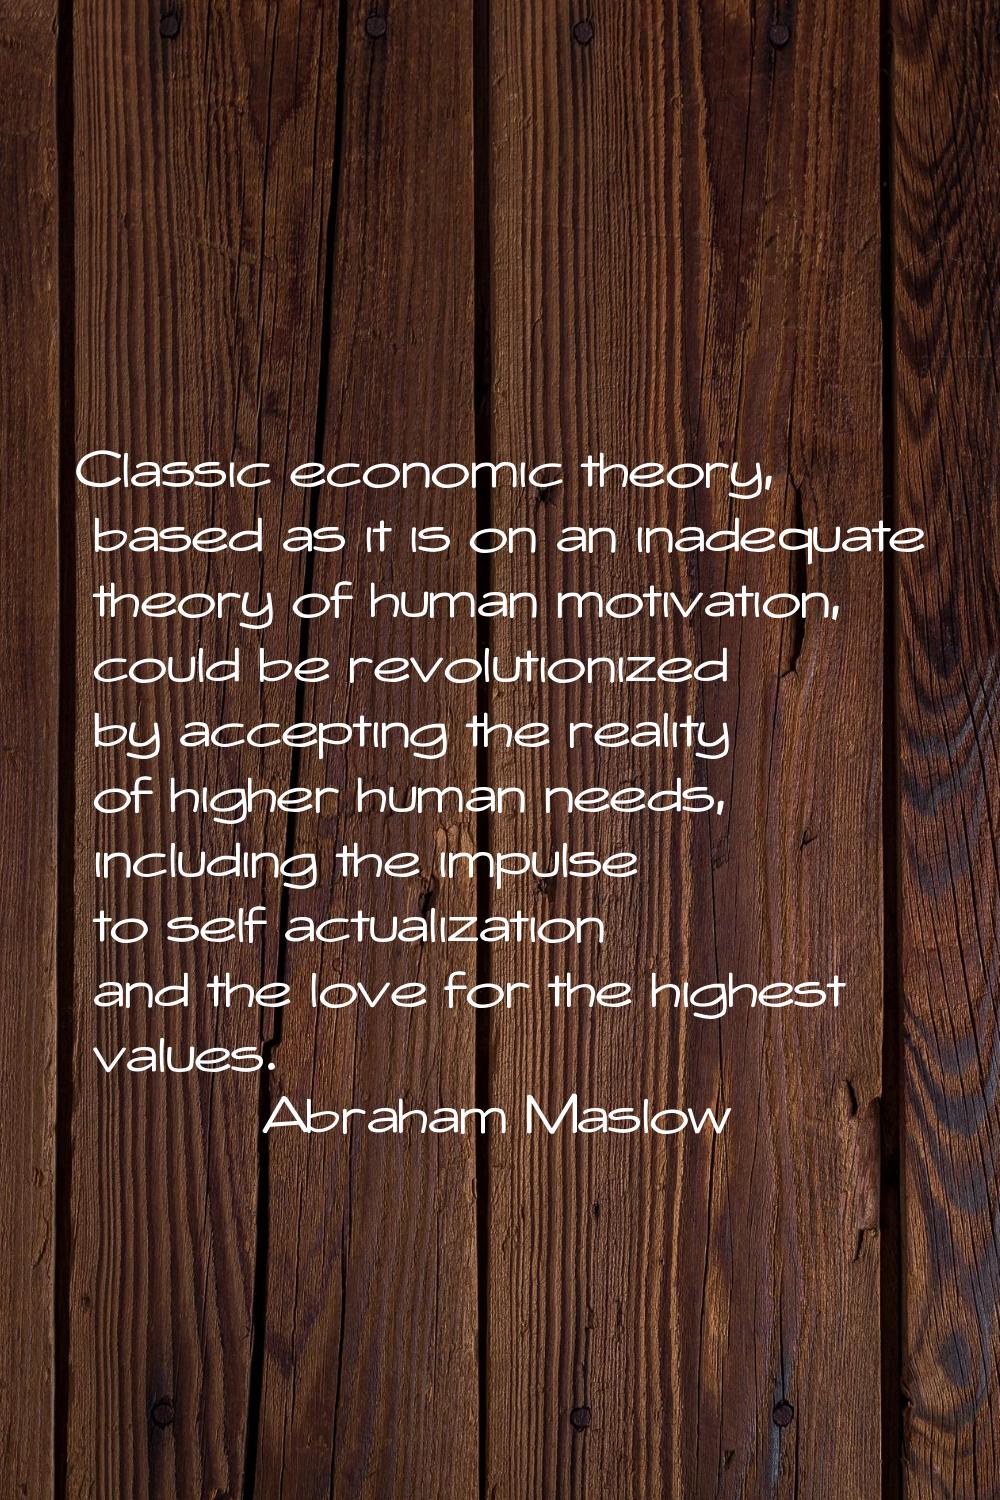 Classic economic theory, based as it is on an inadequate theory of human motivation, could be revol